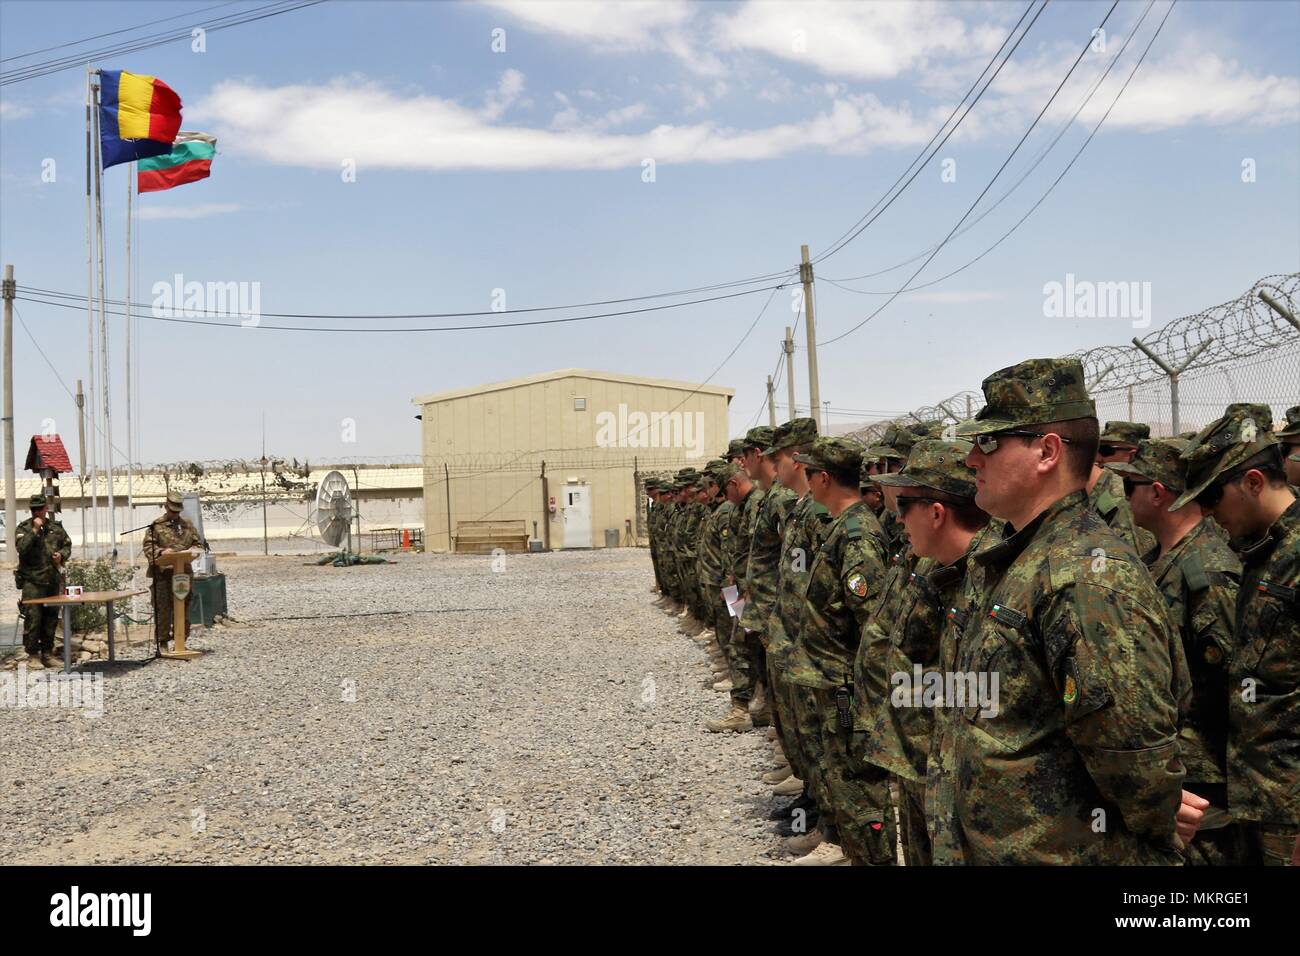 (May 6, 2018) KANDAHAR AIRFIELD, Afghanistan -- Bulgarian Army Soldiers stand in formation to received awards during a celebration of Saint George's Day on Kandahar Airfield, Afghanistan, May 6th, May 6, 2018. Saint George's Day, also known as the National Day of Bravery, is an official Bulgarian holiday which has been celebrated since the formation of the Bulgarian Army 140 years ago. Units with the Bulgarian Army are a part of the NATO Resolute Support Mission assigned to Train, Advise and Assist Command-South (TAAC-S). (NATO photo released by Train, Advise and Assist Command-South Public Af Stock Photo